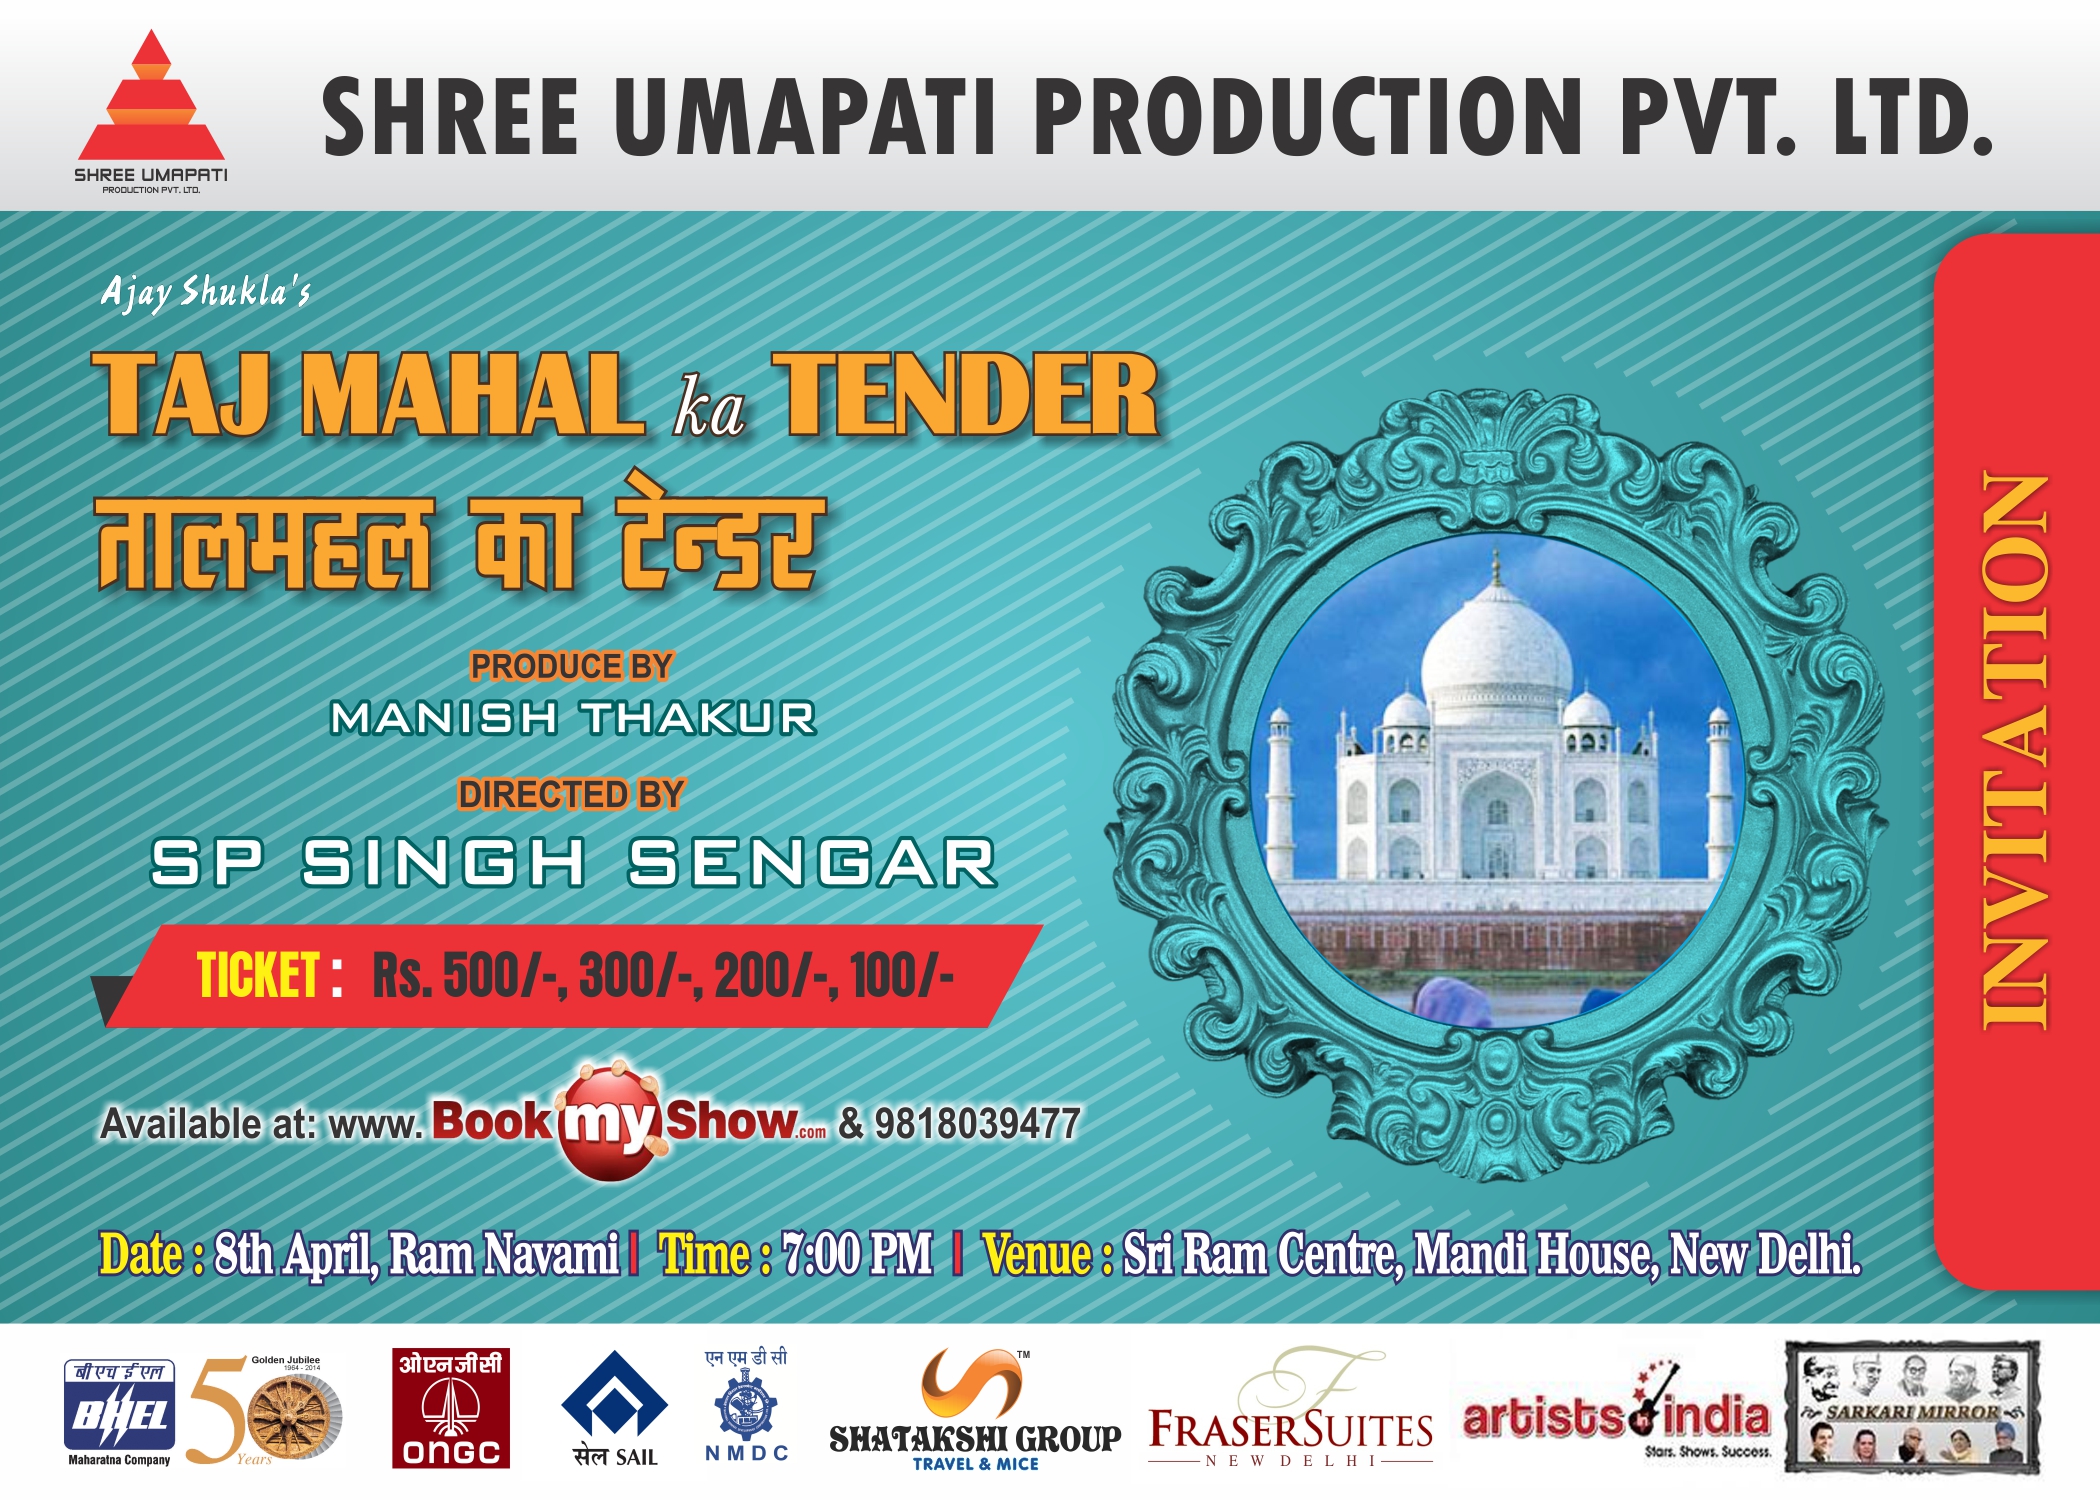 "TAJ MAHAL KA TENDER" AS NAME SOUNDS AMAZING SO IS THE PLAY- SO DON"T MISS IT